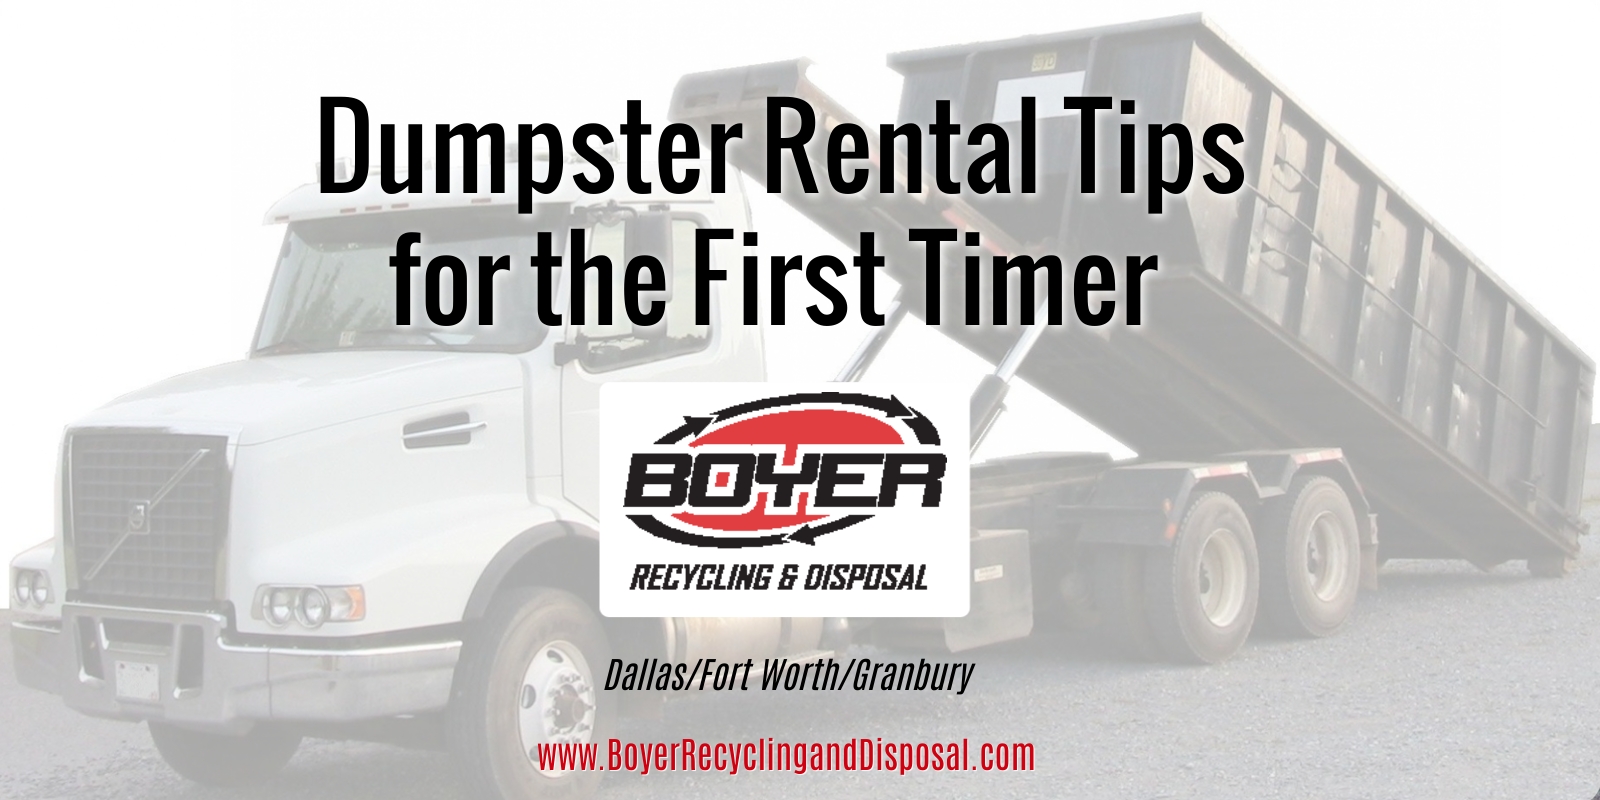 Dumpster Rental Overview for First Timers